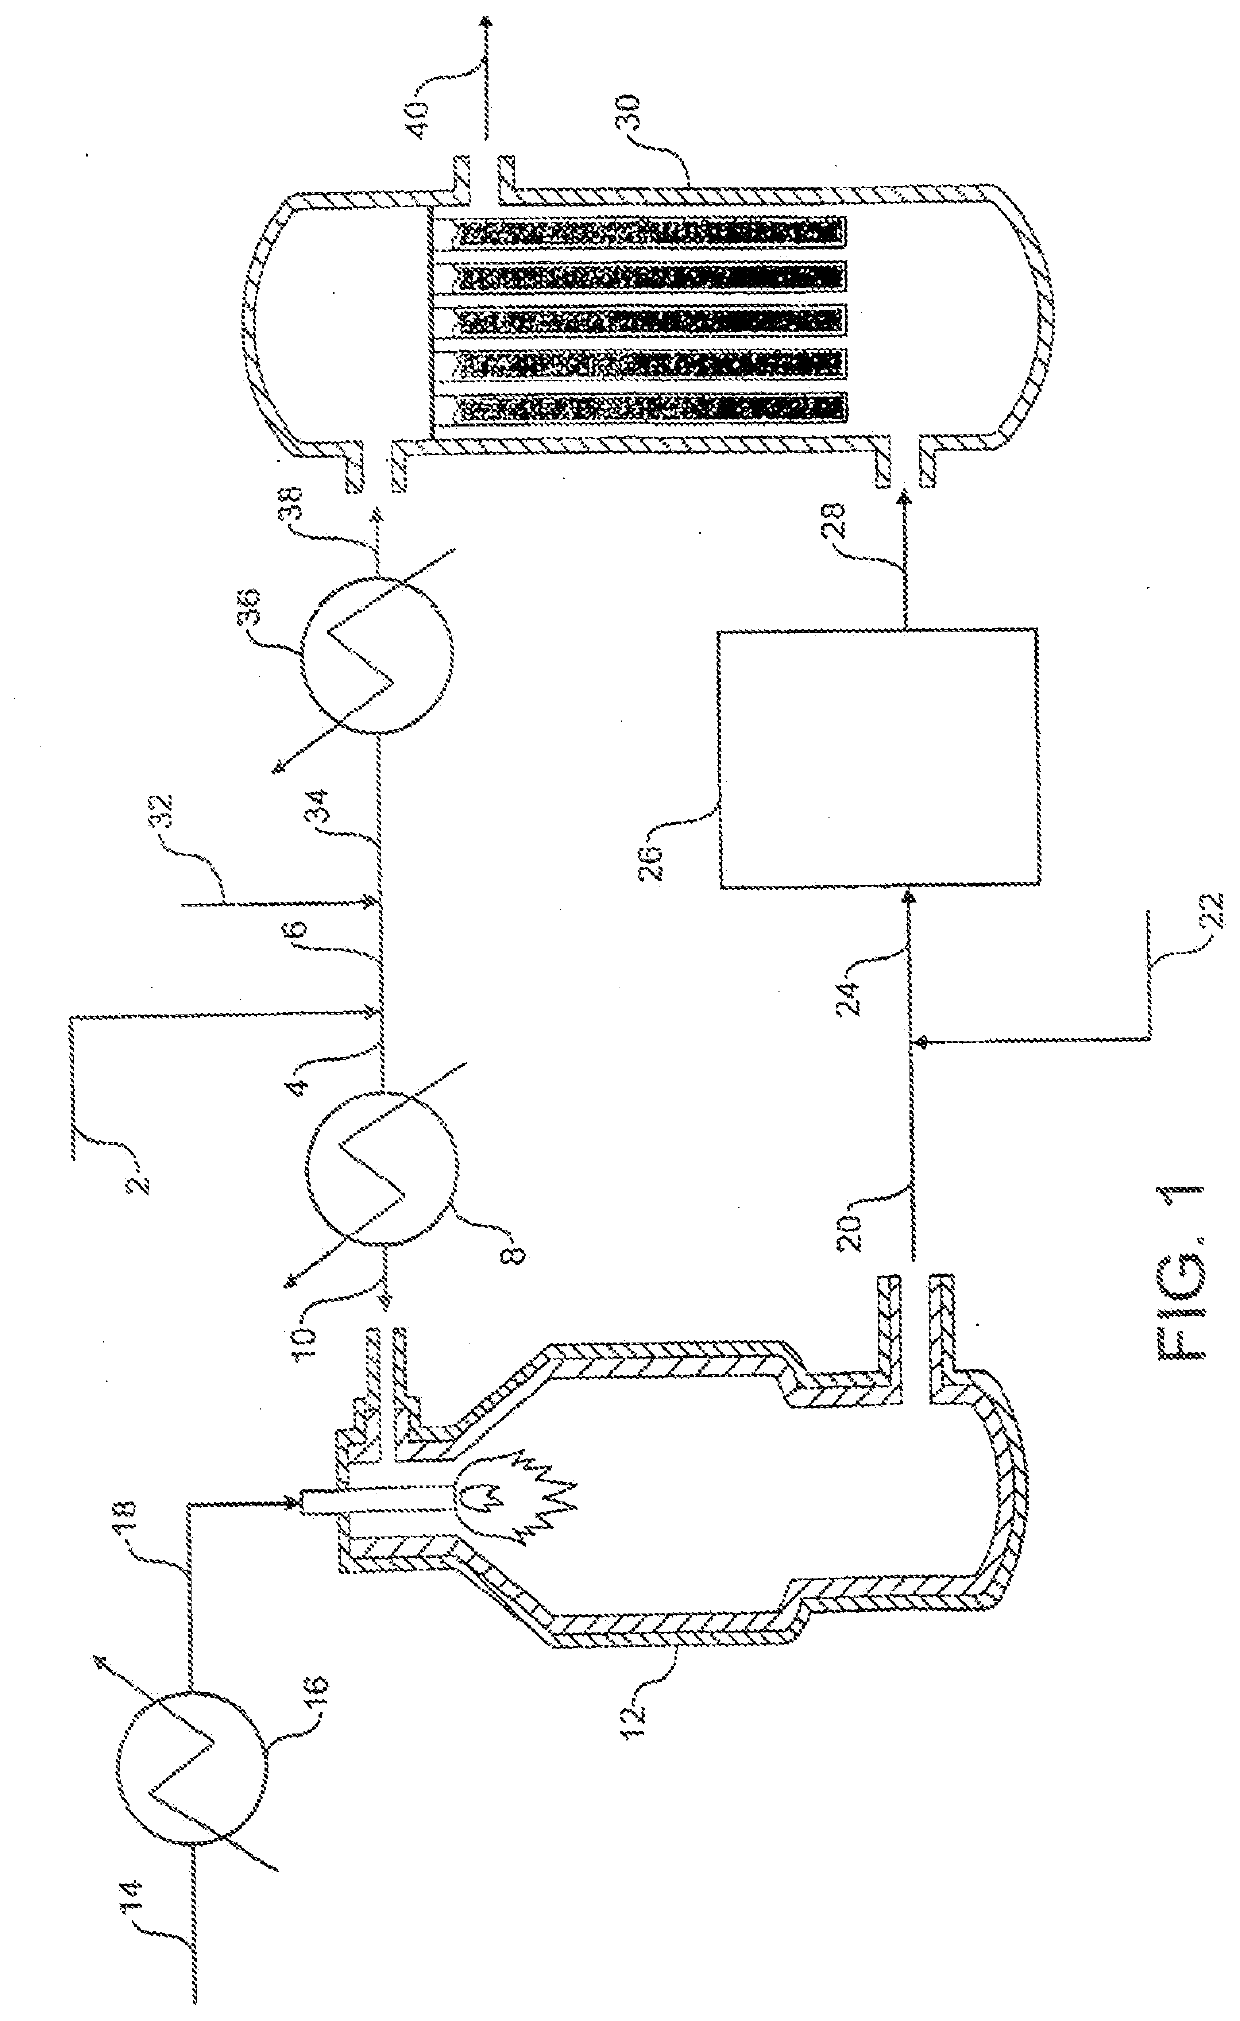 Process and apparatus for the production of synthesis gas